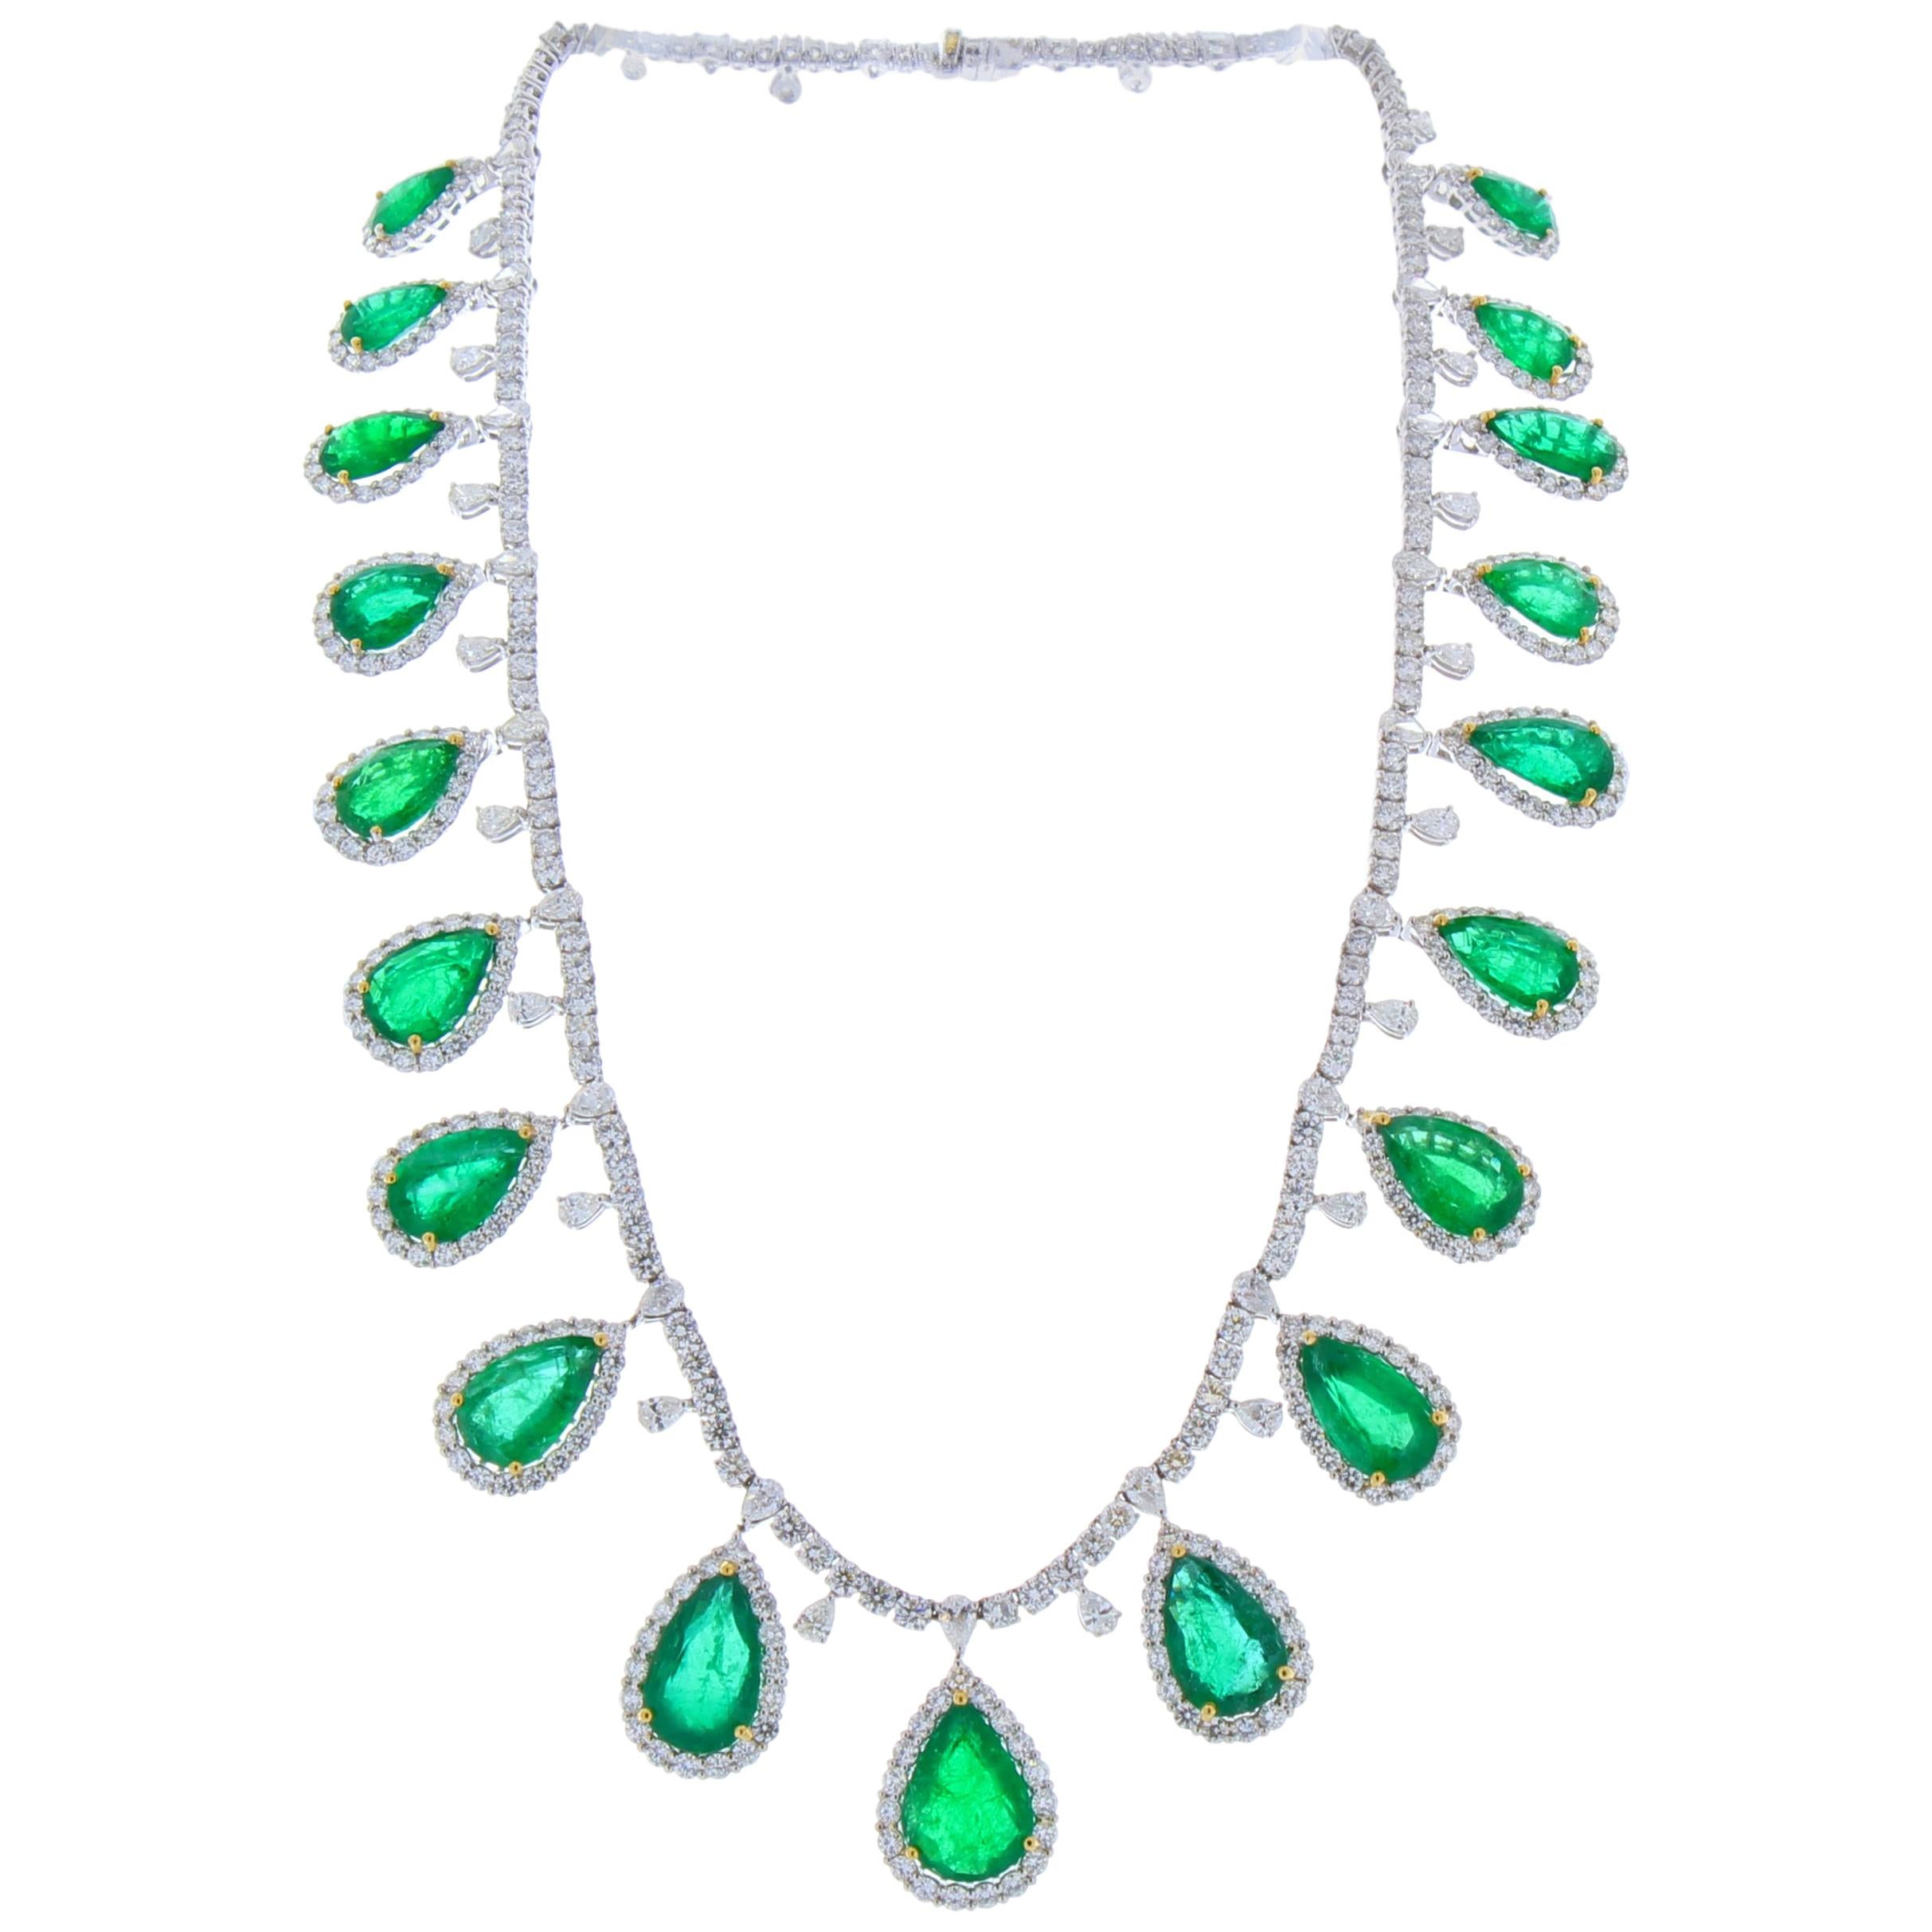 50.34 Carat Total Pear Shaped Emerald and Diamond Necklace in 18 Karat Gold